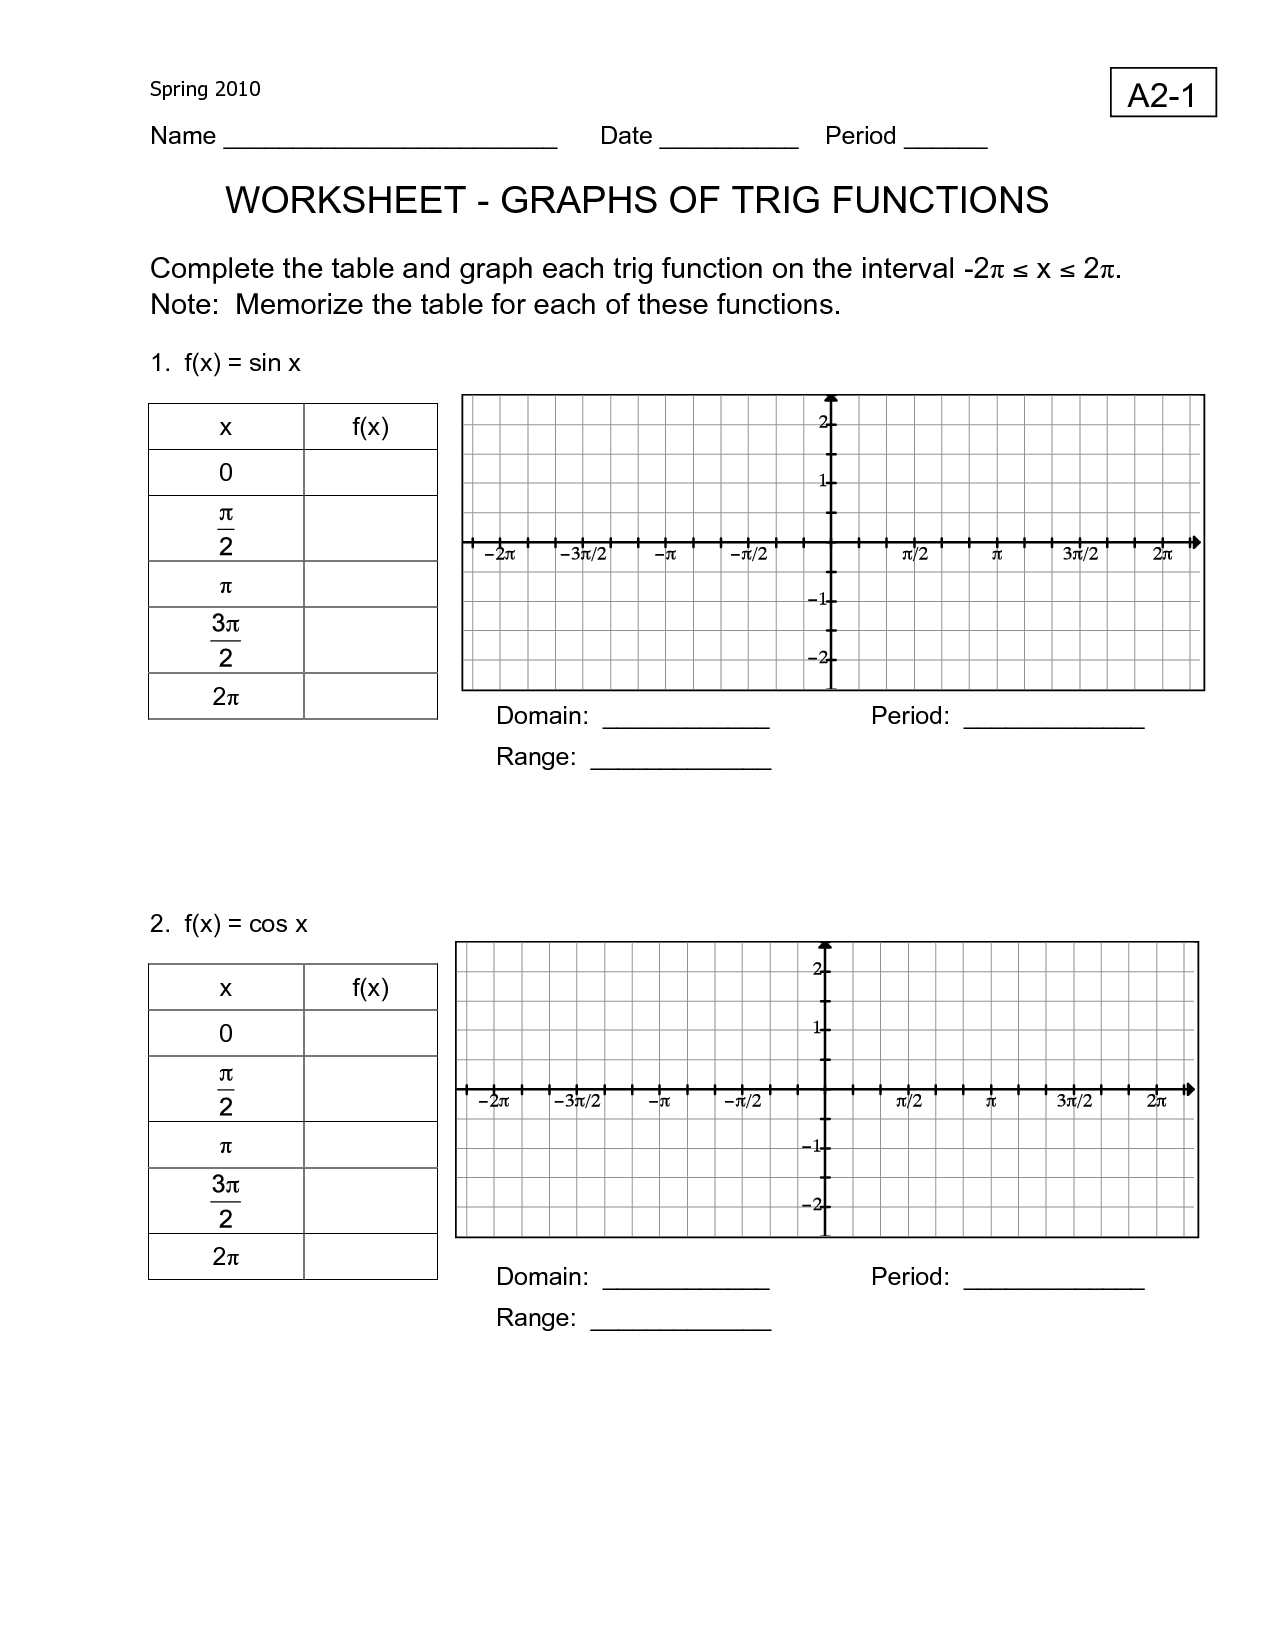 worksheet. Graphing Sine And Cosine Functions Worksheet. Worksheet Fun Worksheet Study Site